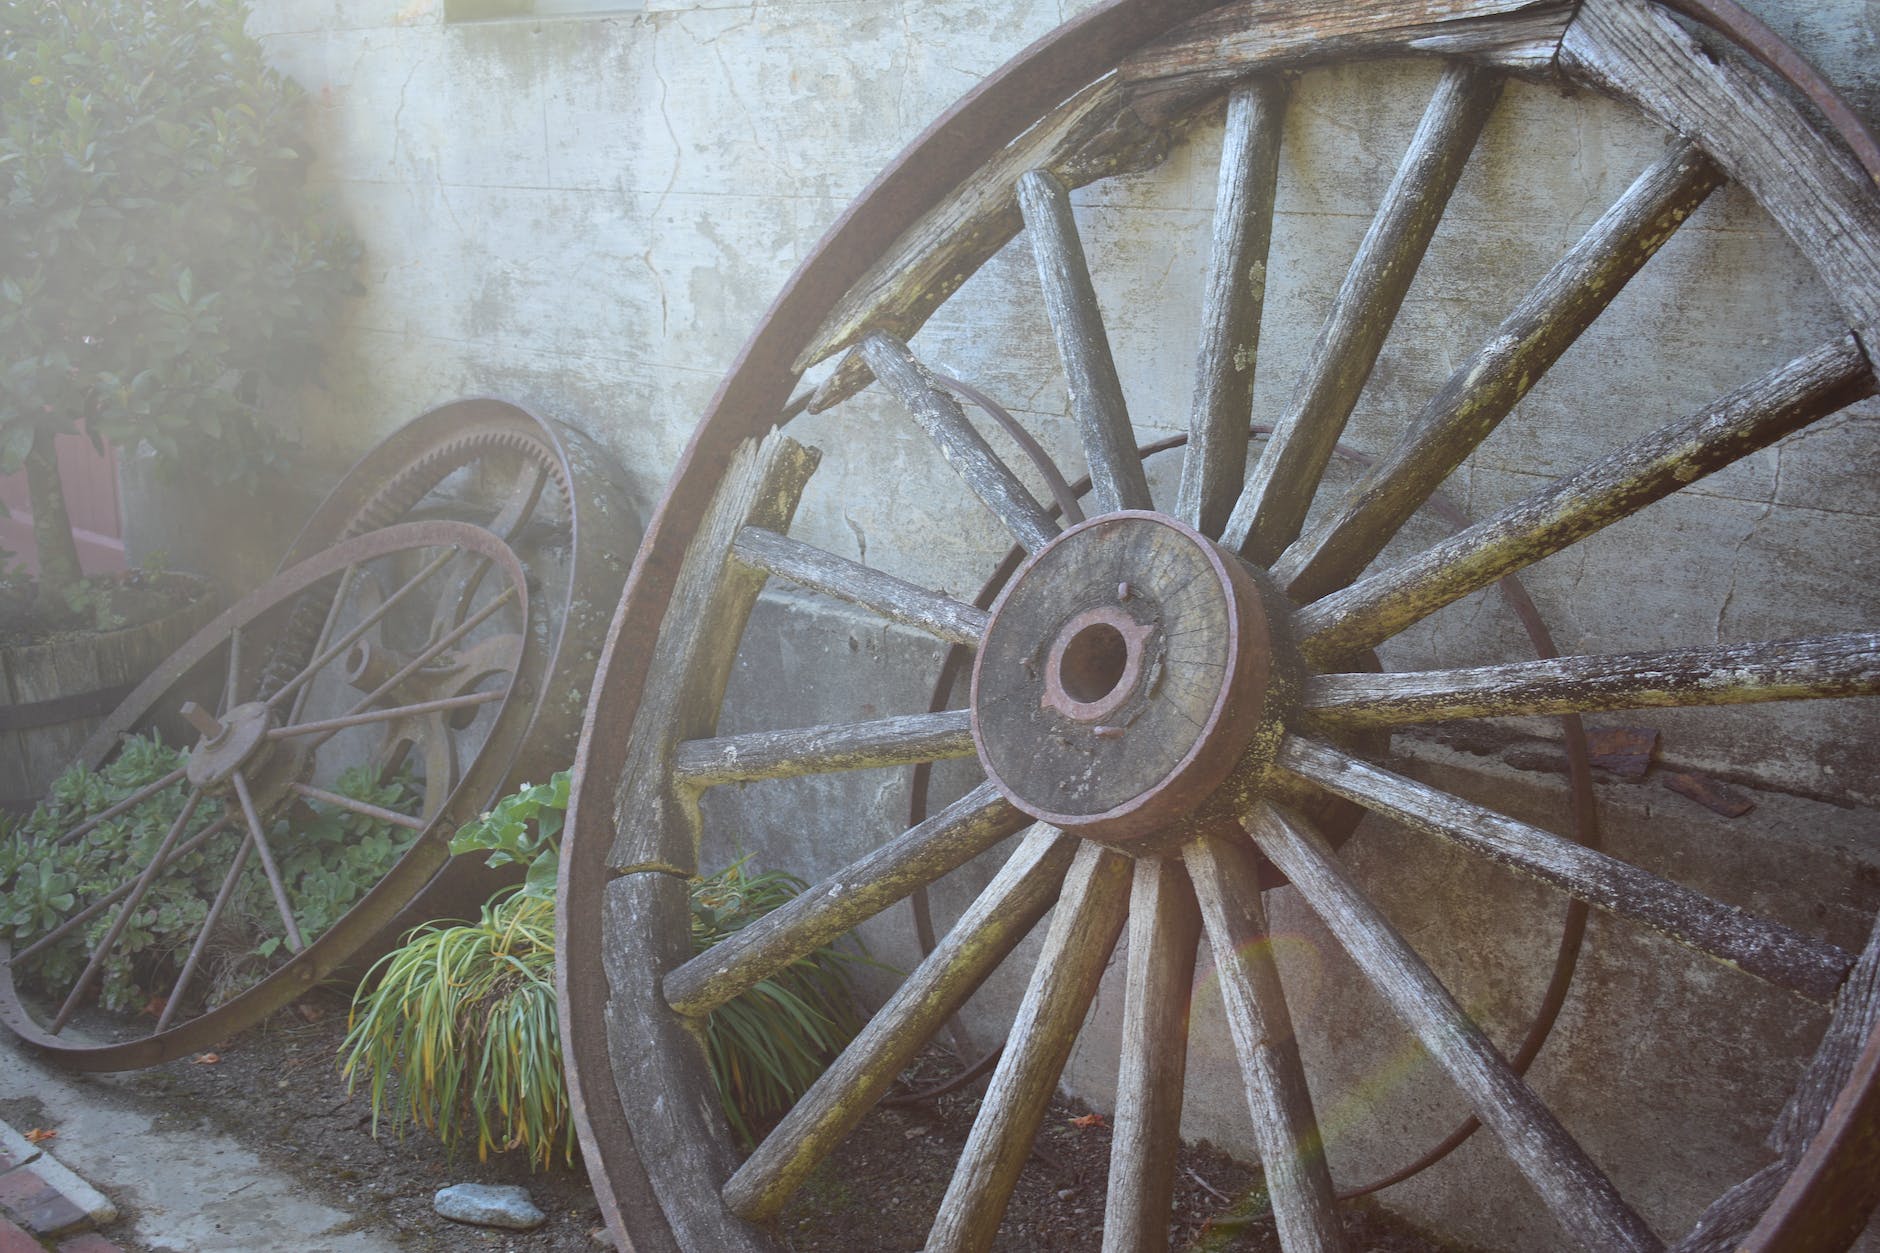 Several old wooden wagon wheels leaning against a concrete wall.